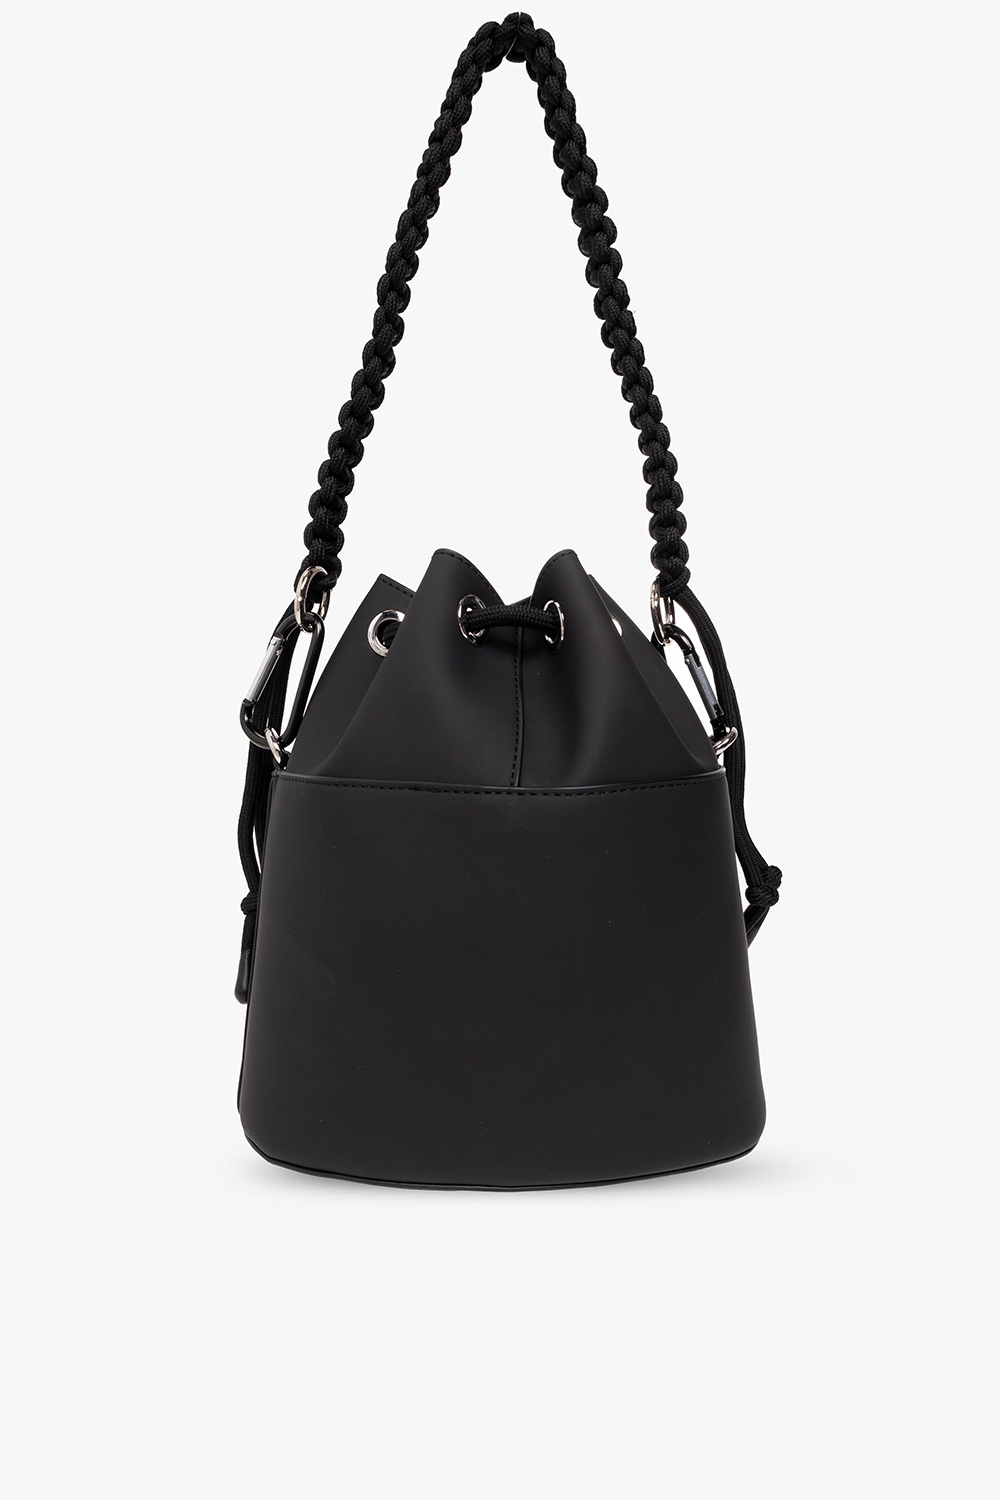 Versace Jeans Couture Bucket bag